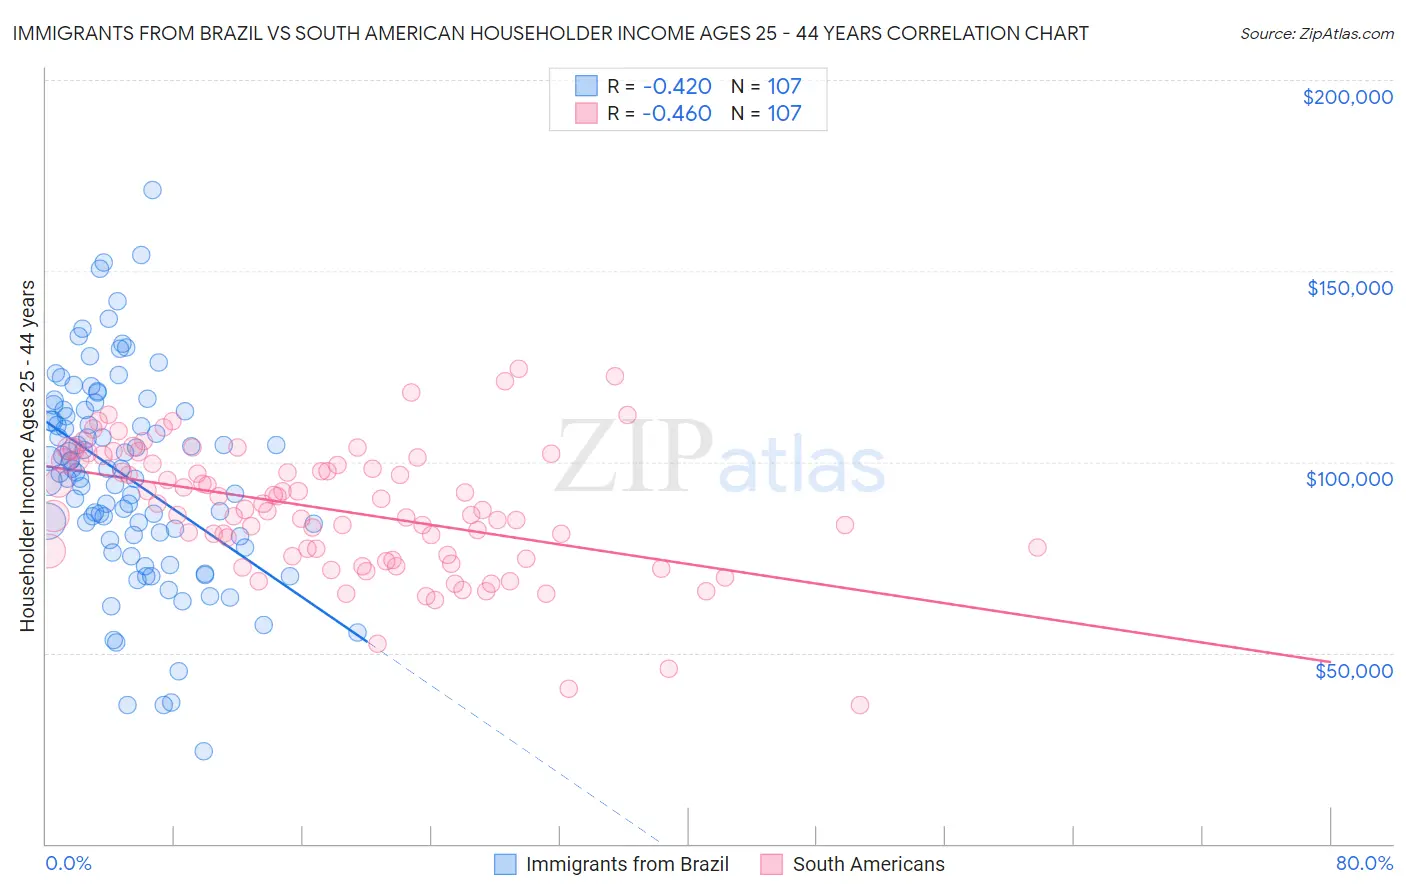 Immigrants from Brazil vs South American Householder Income Ages 25 - 44 years